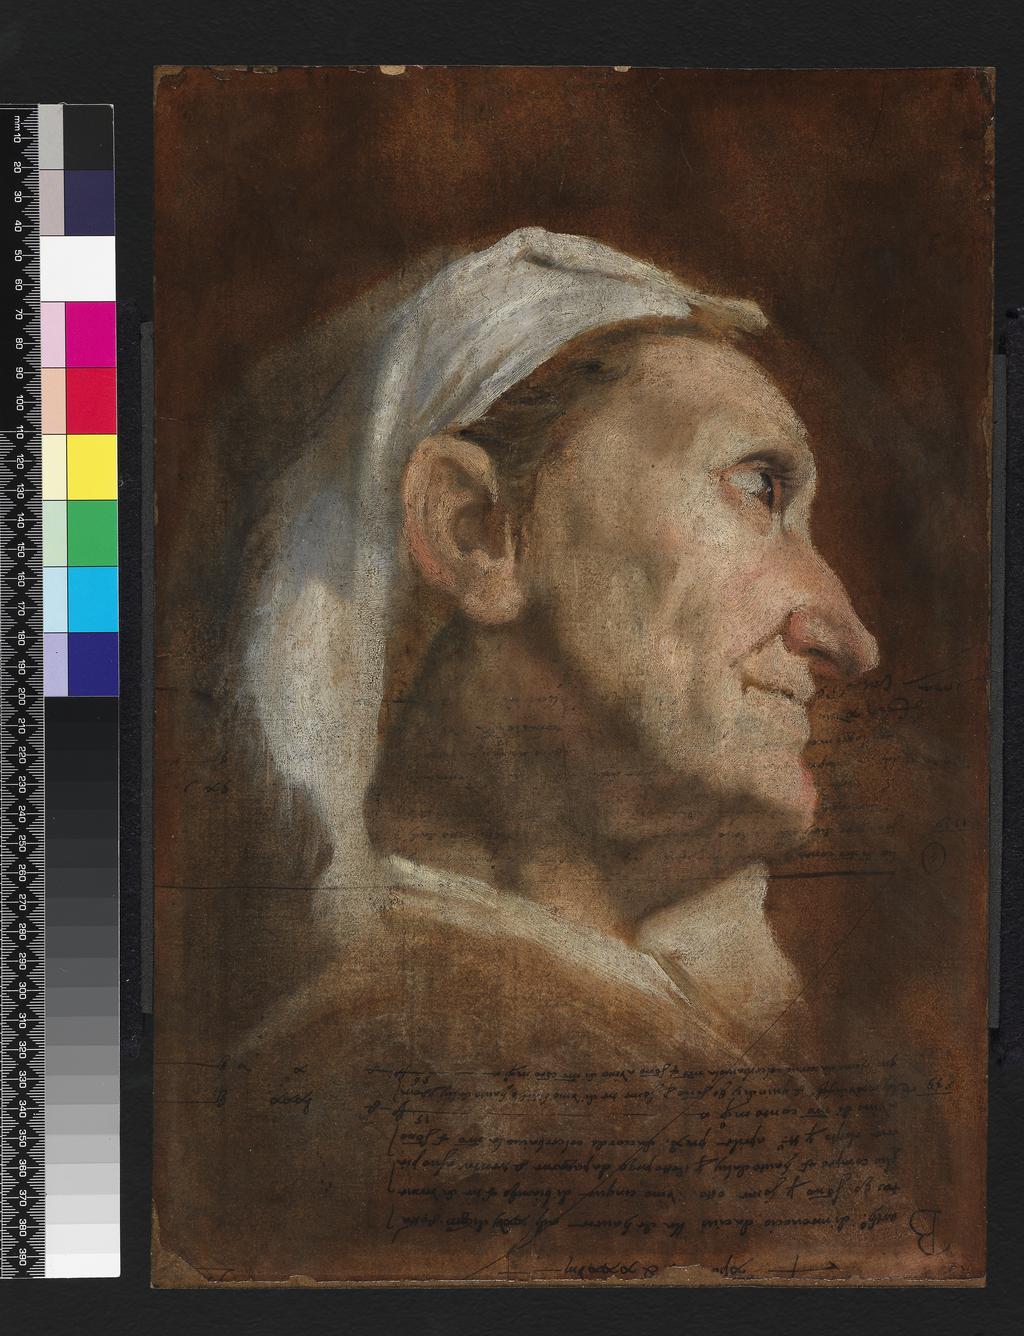 An image of Head of an old woman. Carracci, Annibale (Italian, 1560-1609). Oil on paper laid down on panel, height 42.0 cm, width 29.0 cm, c.1590. Bolognese School.